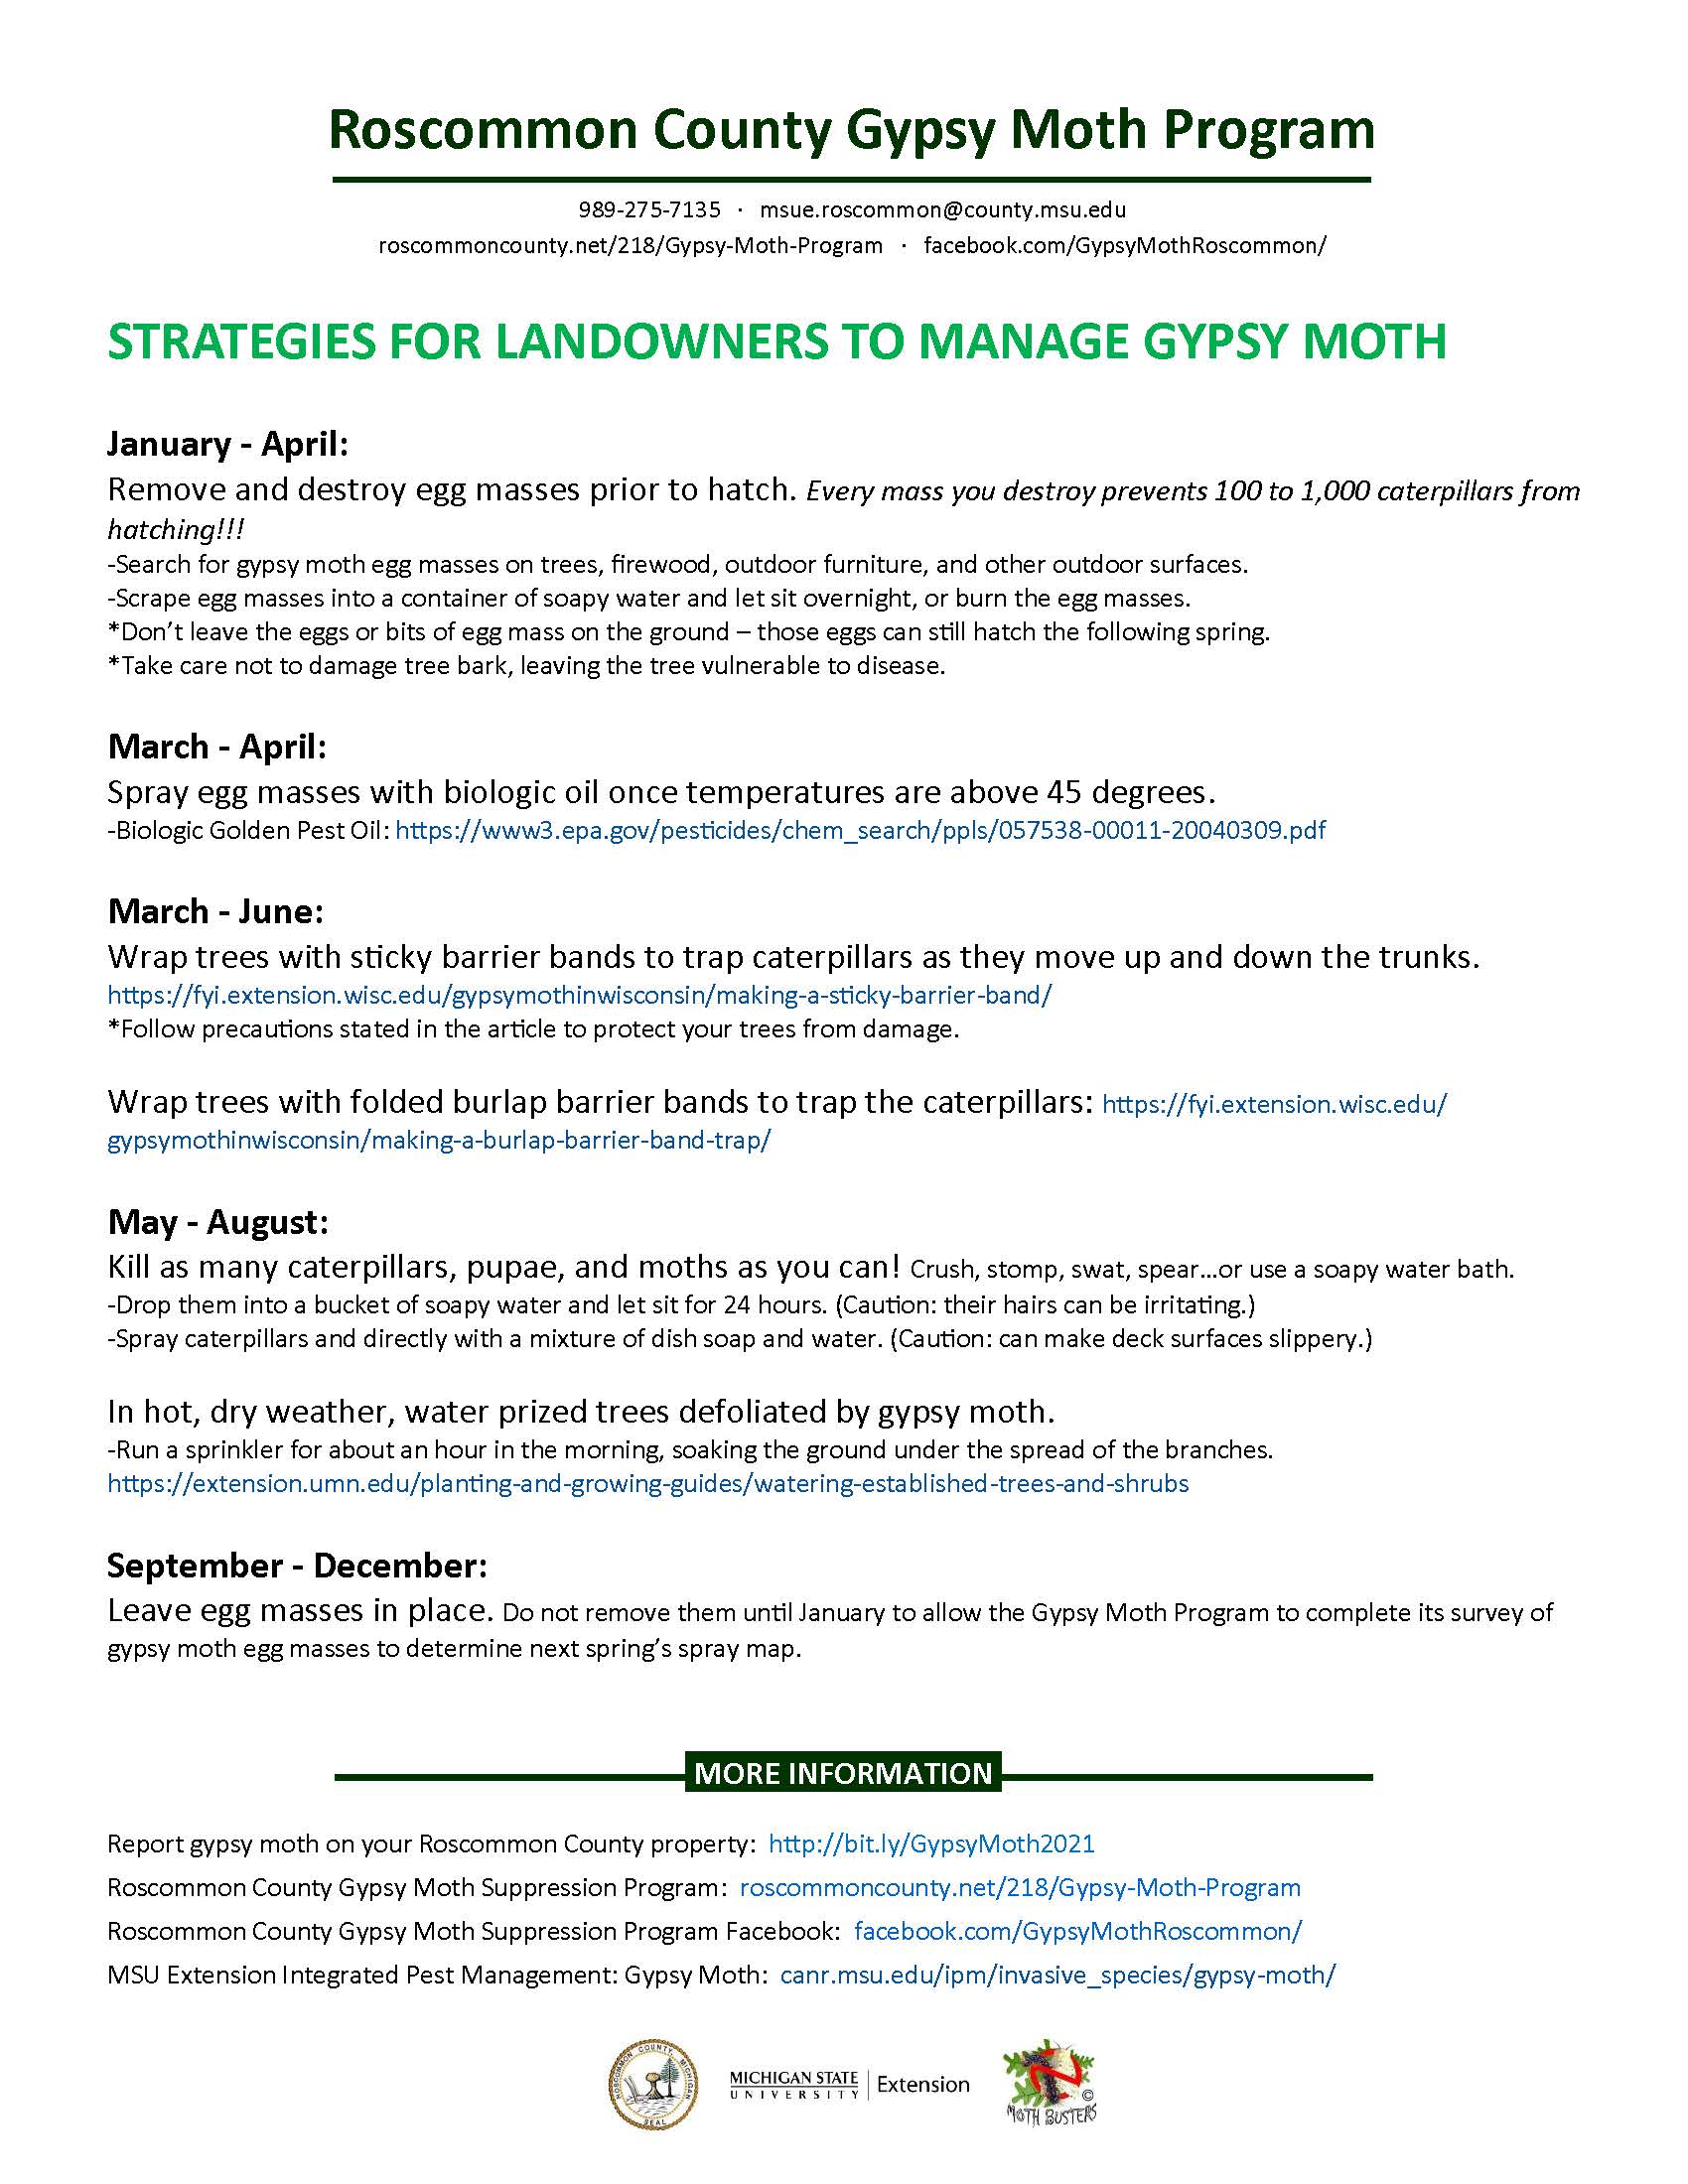 Gypsy Moth Management Strategies_Page_1